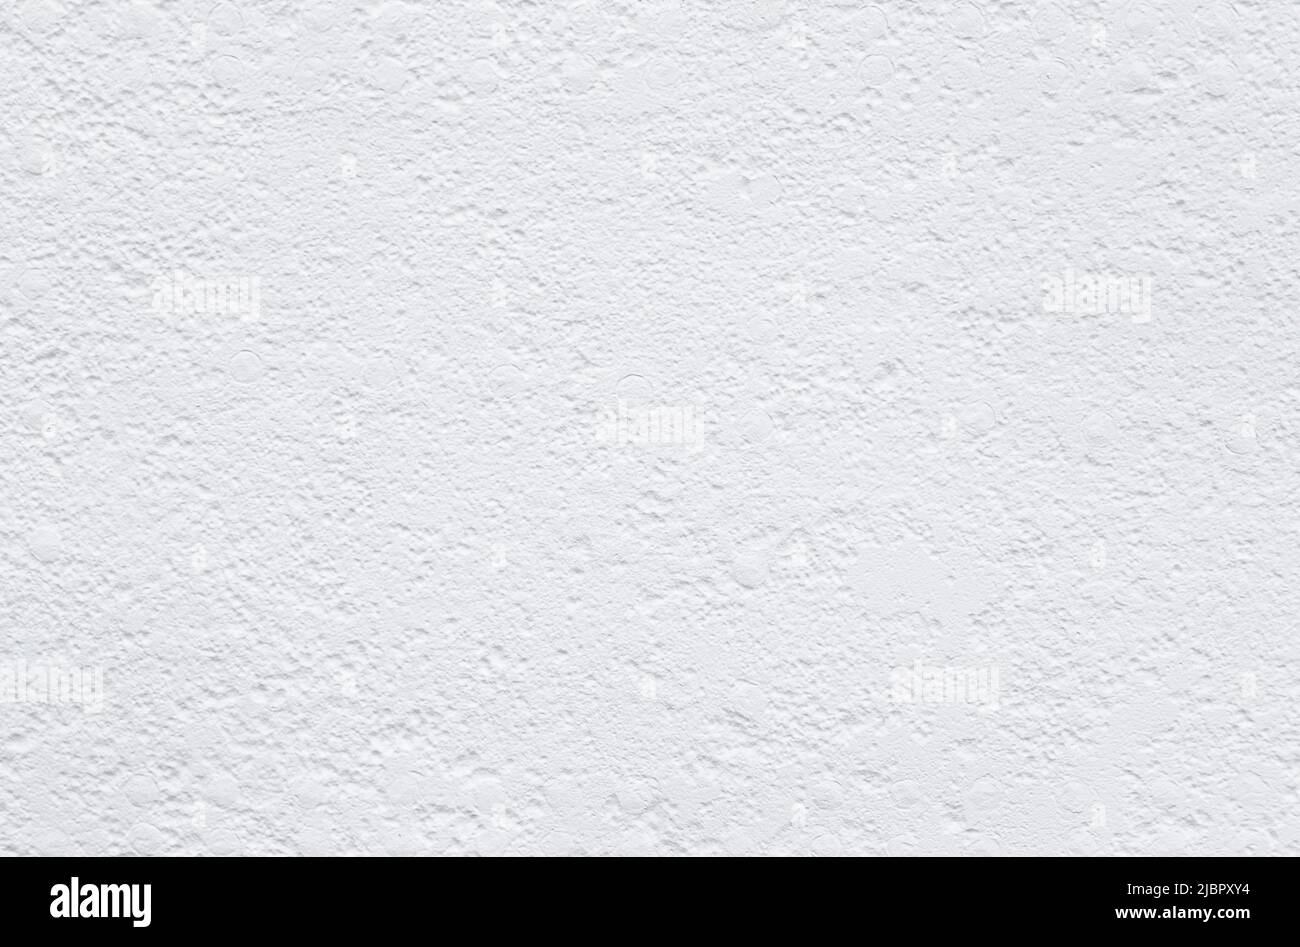 Uneven and bumpy wall painted in white, front view. High resolution full frame textured background. Copy space. Stock Photo